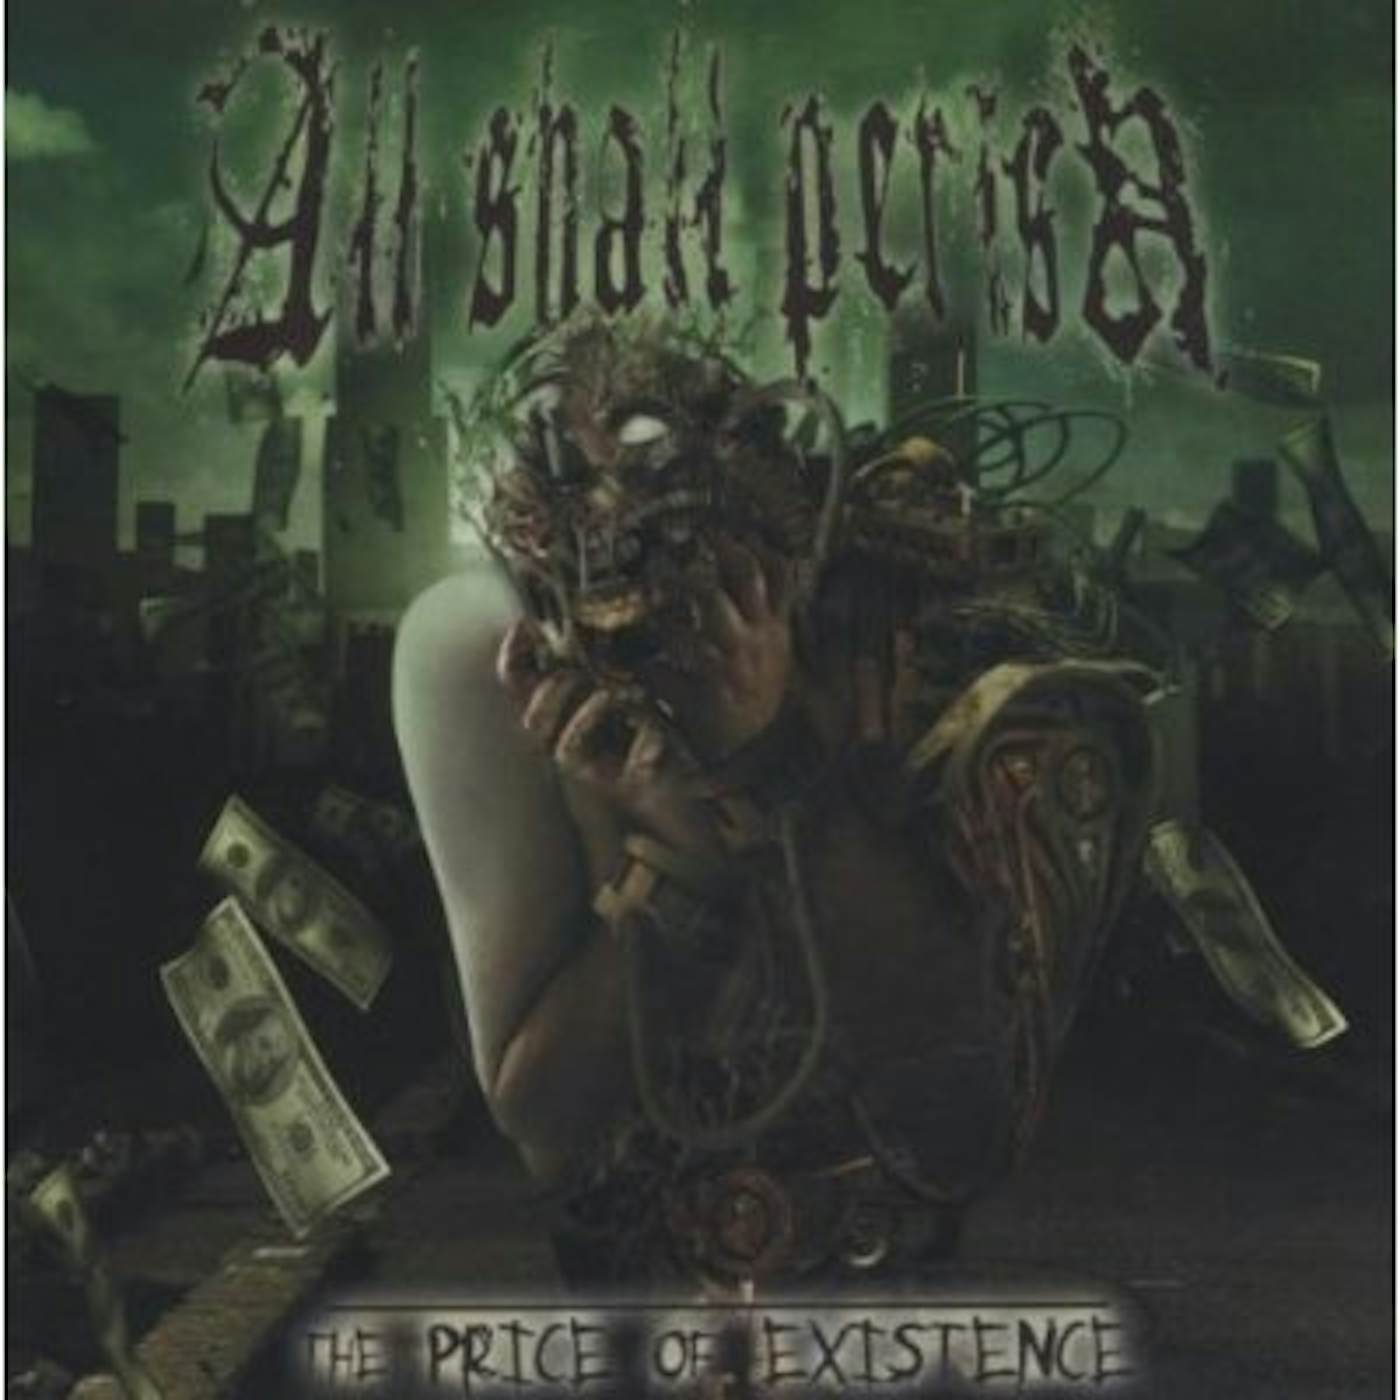 All Shall Perish PRICE OF EXISTENCE CD